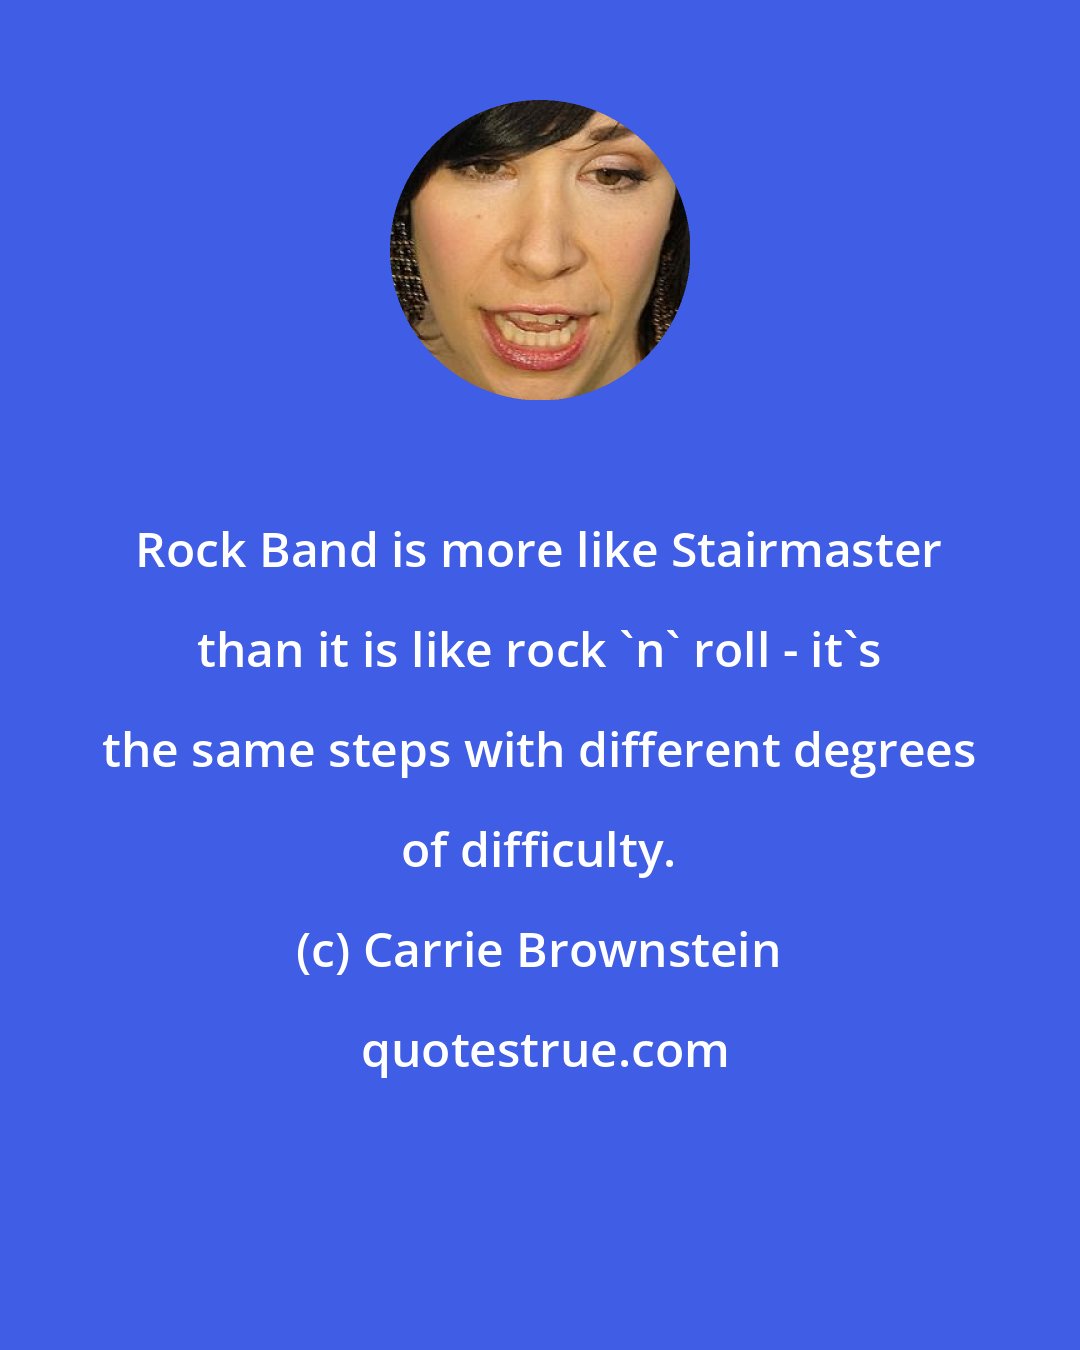 Carrie Brownstein: Rock Band is more like Stairmaster than it is like rock 'n' roll - it's the same steps with different degrees of difficulty.